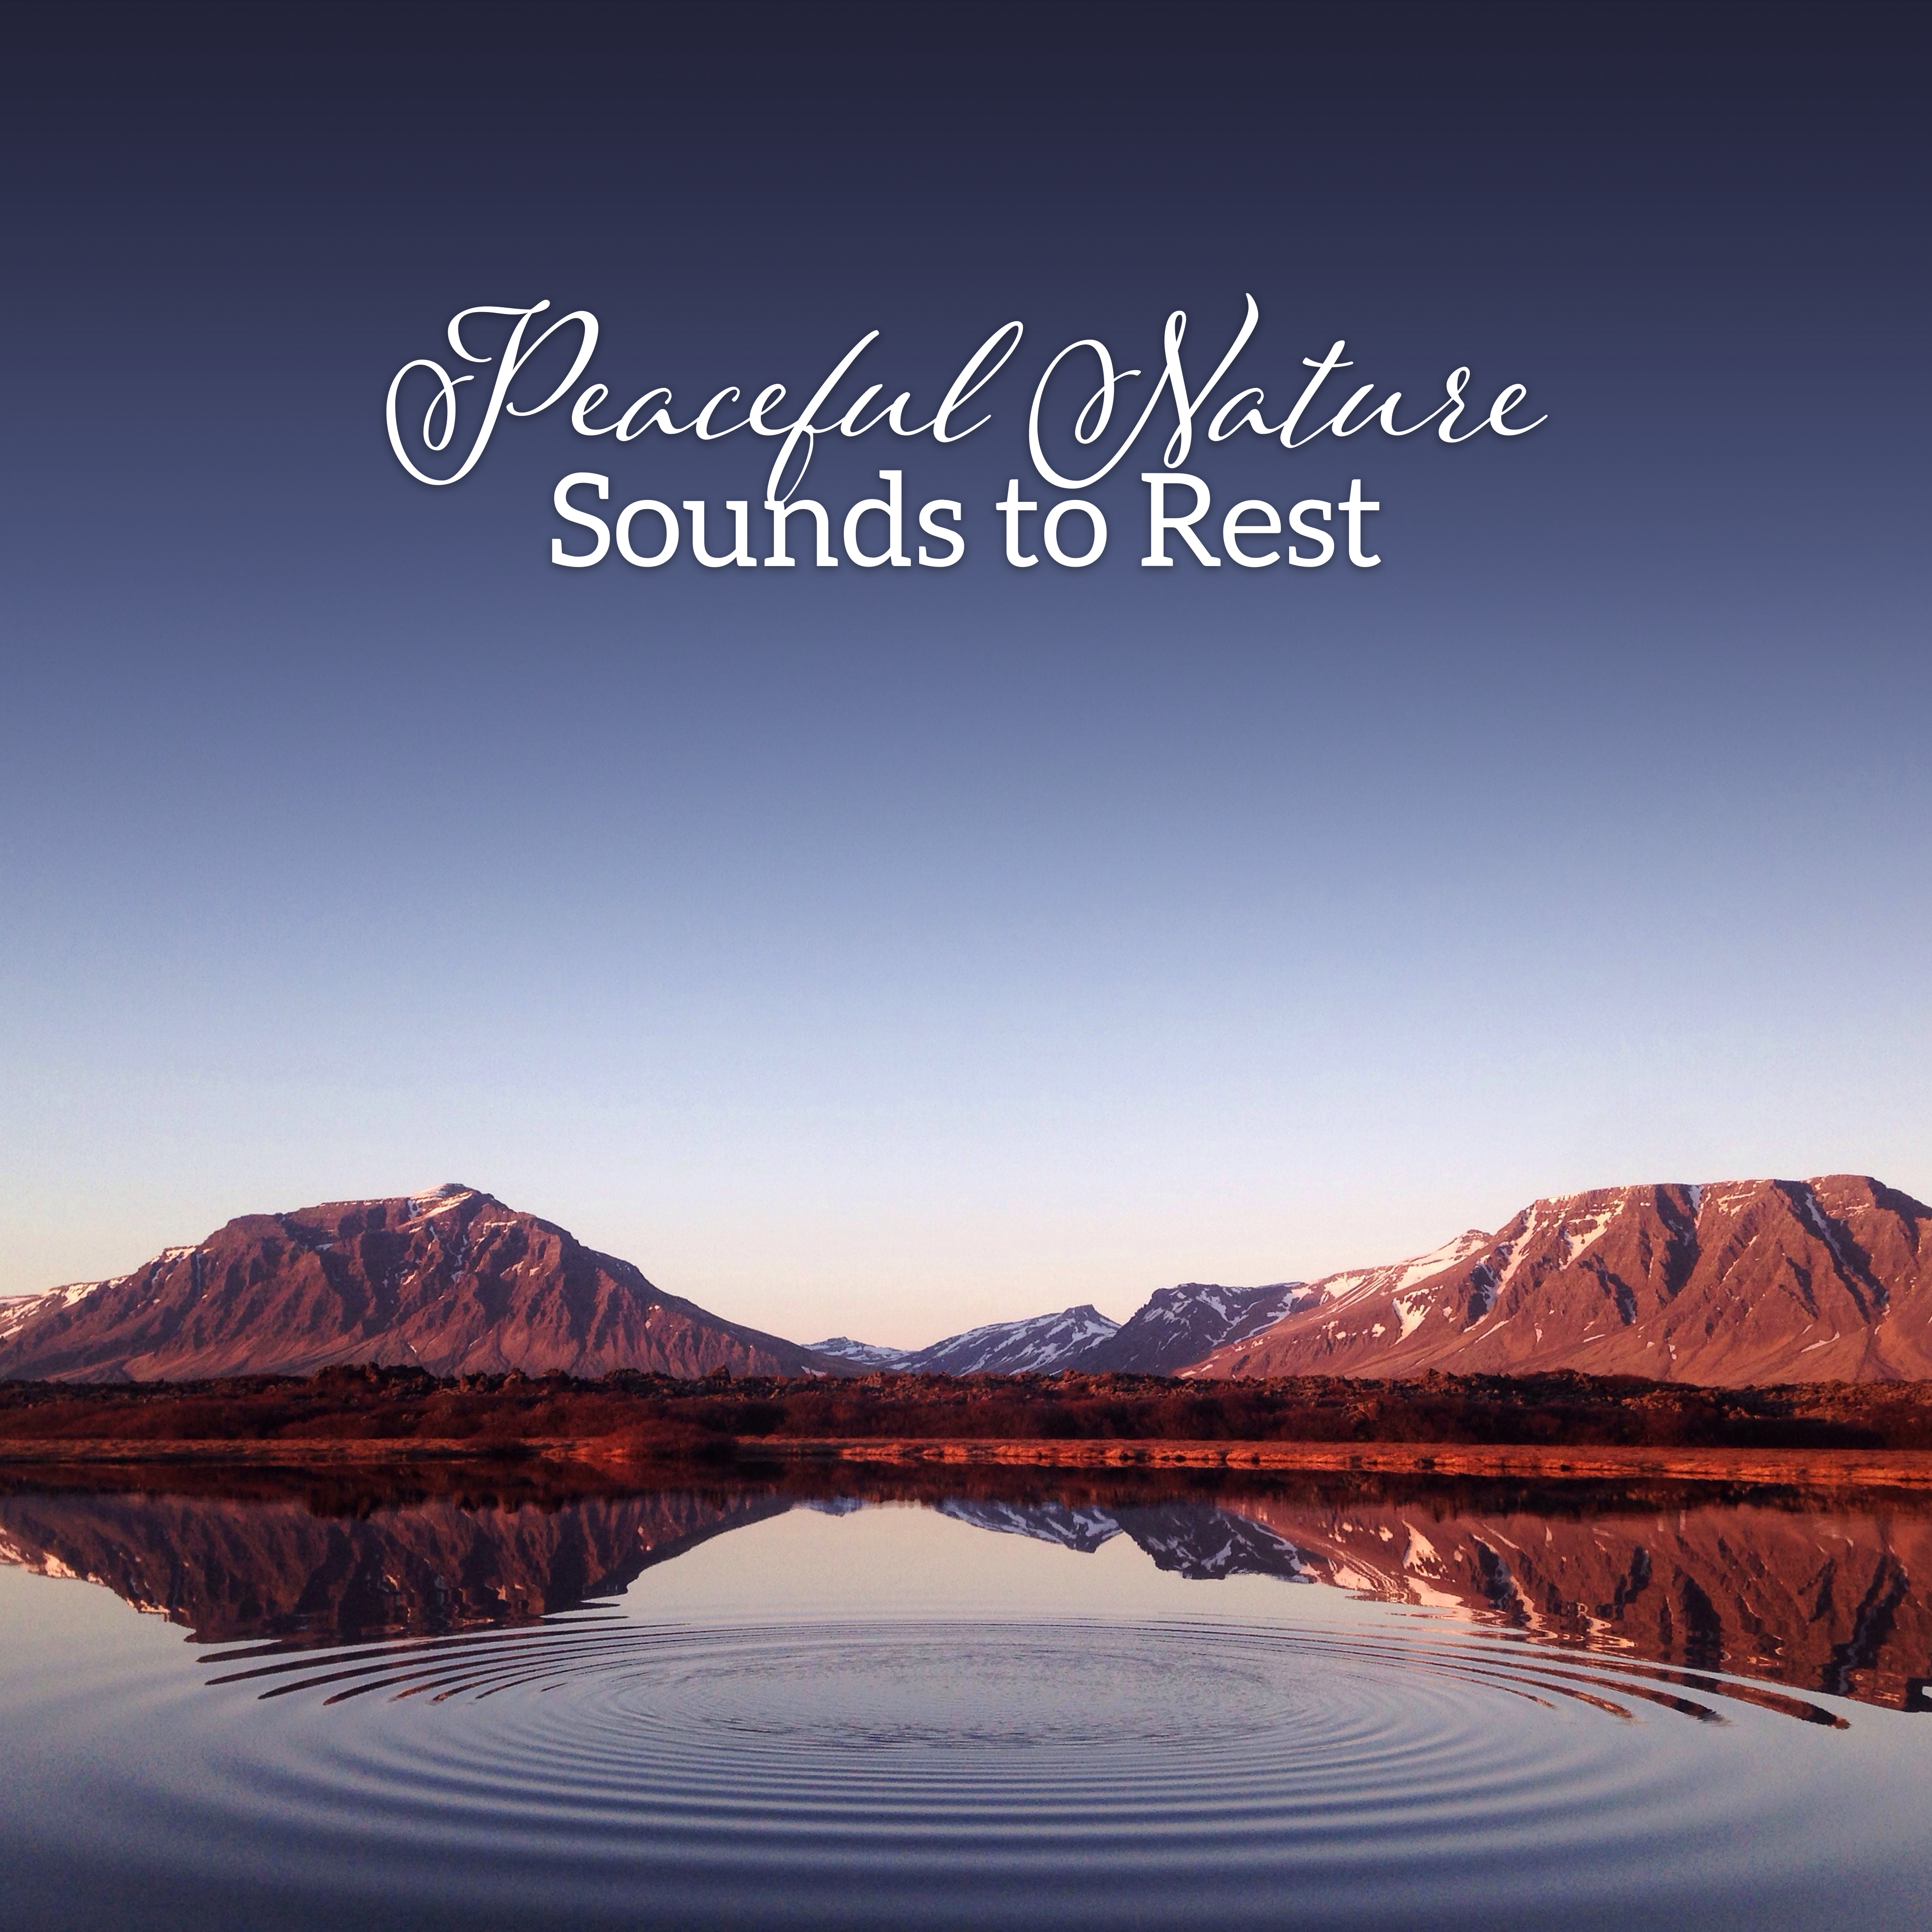 Peaceful Nature Sounds to Rest – Easy Listening, Nature Waves, Healing Sounds of New Age, Stress Relief, Calm Down with Soft Melodies